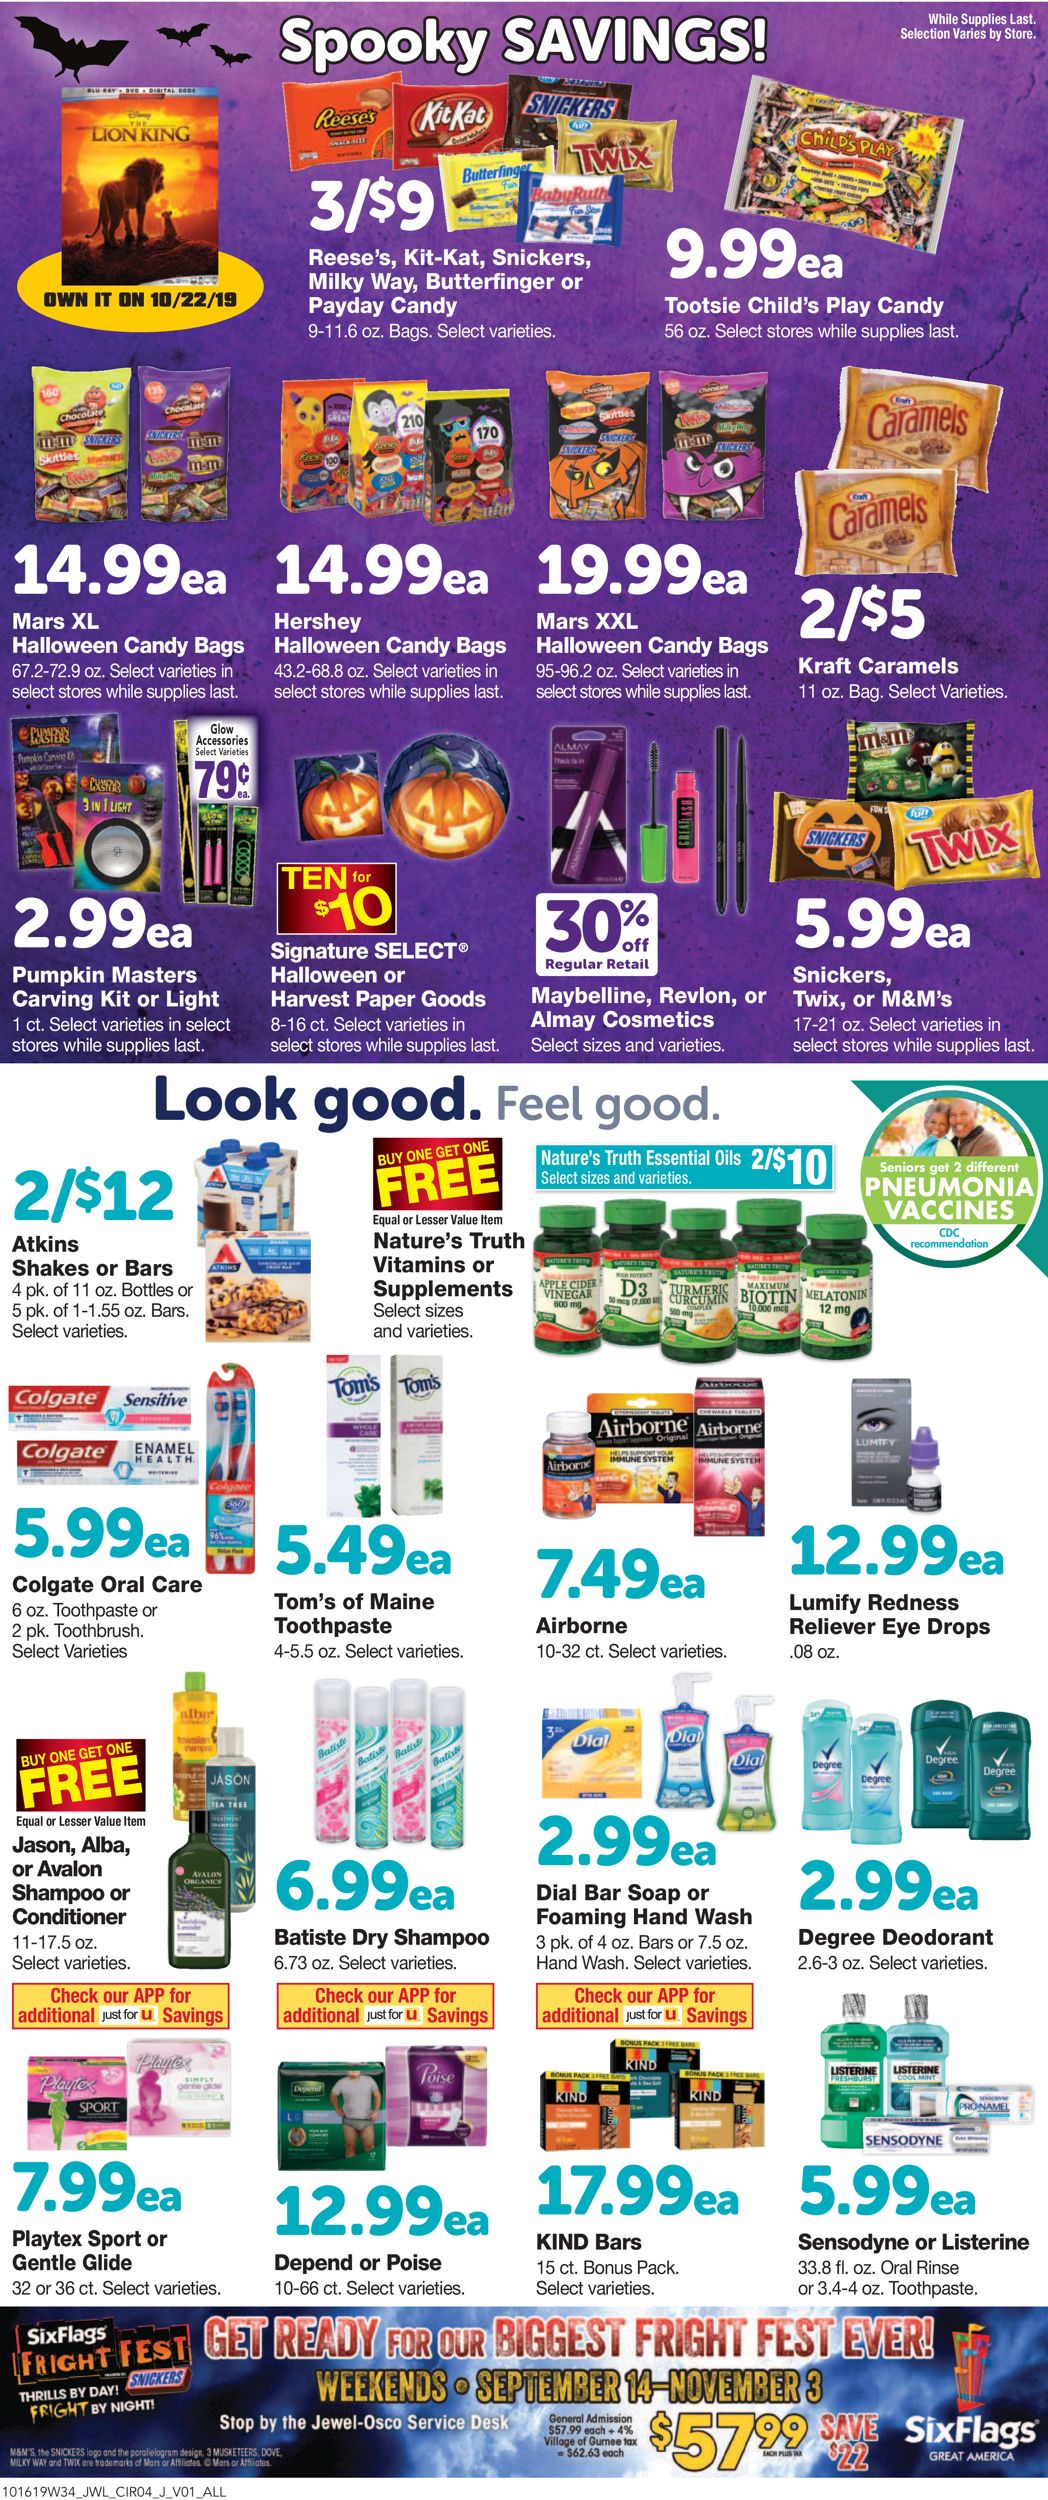 Jewel Osco Current weekly ad 10/16  10/22/2019 [7]  frequentads.com